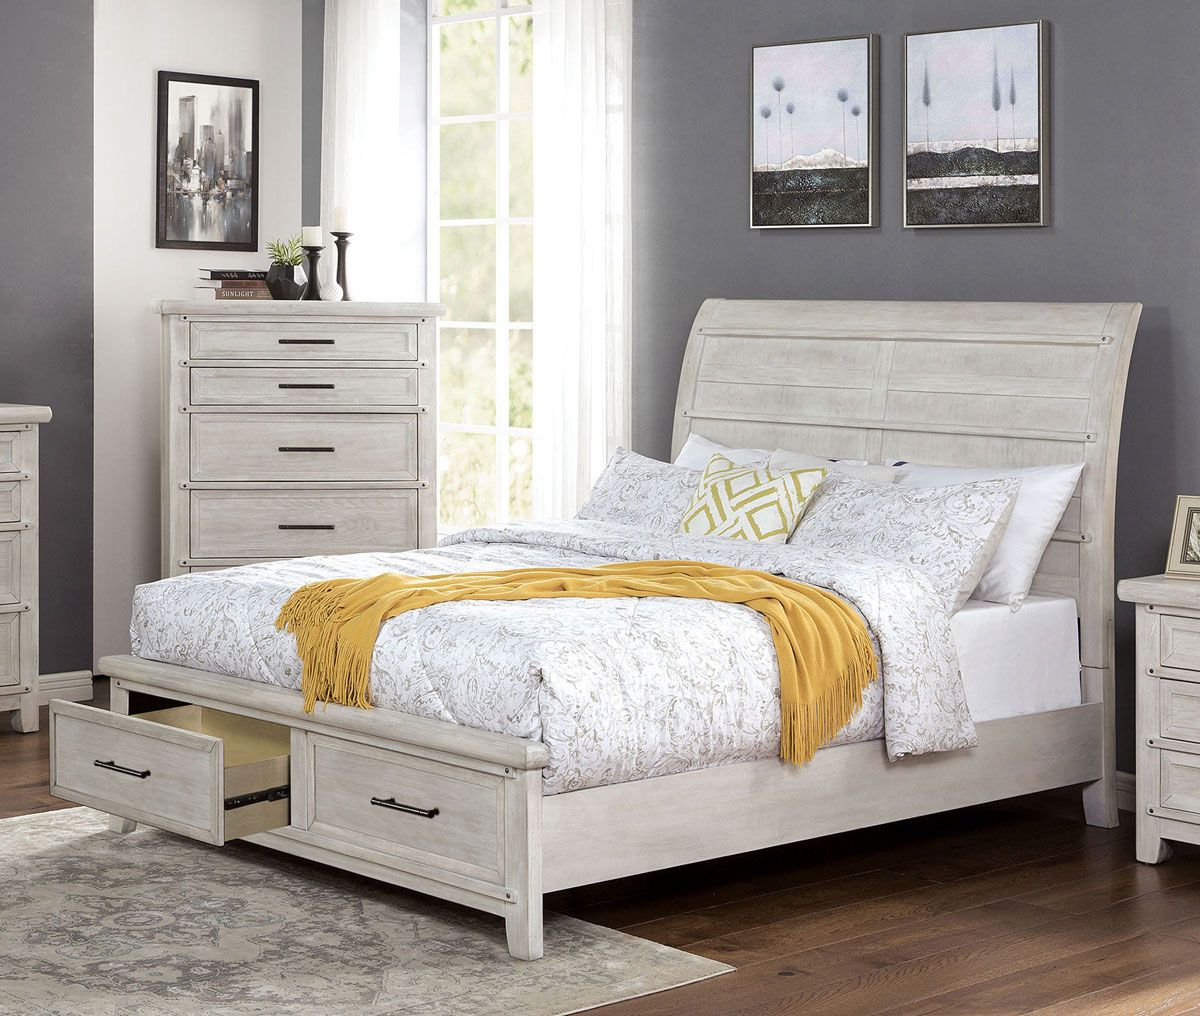 Granada Rustic White Finish Bed With Drawers